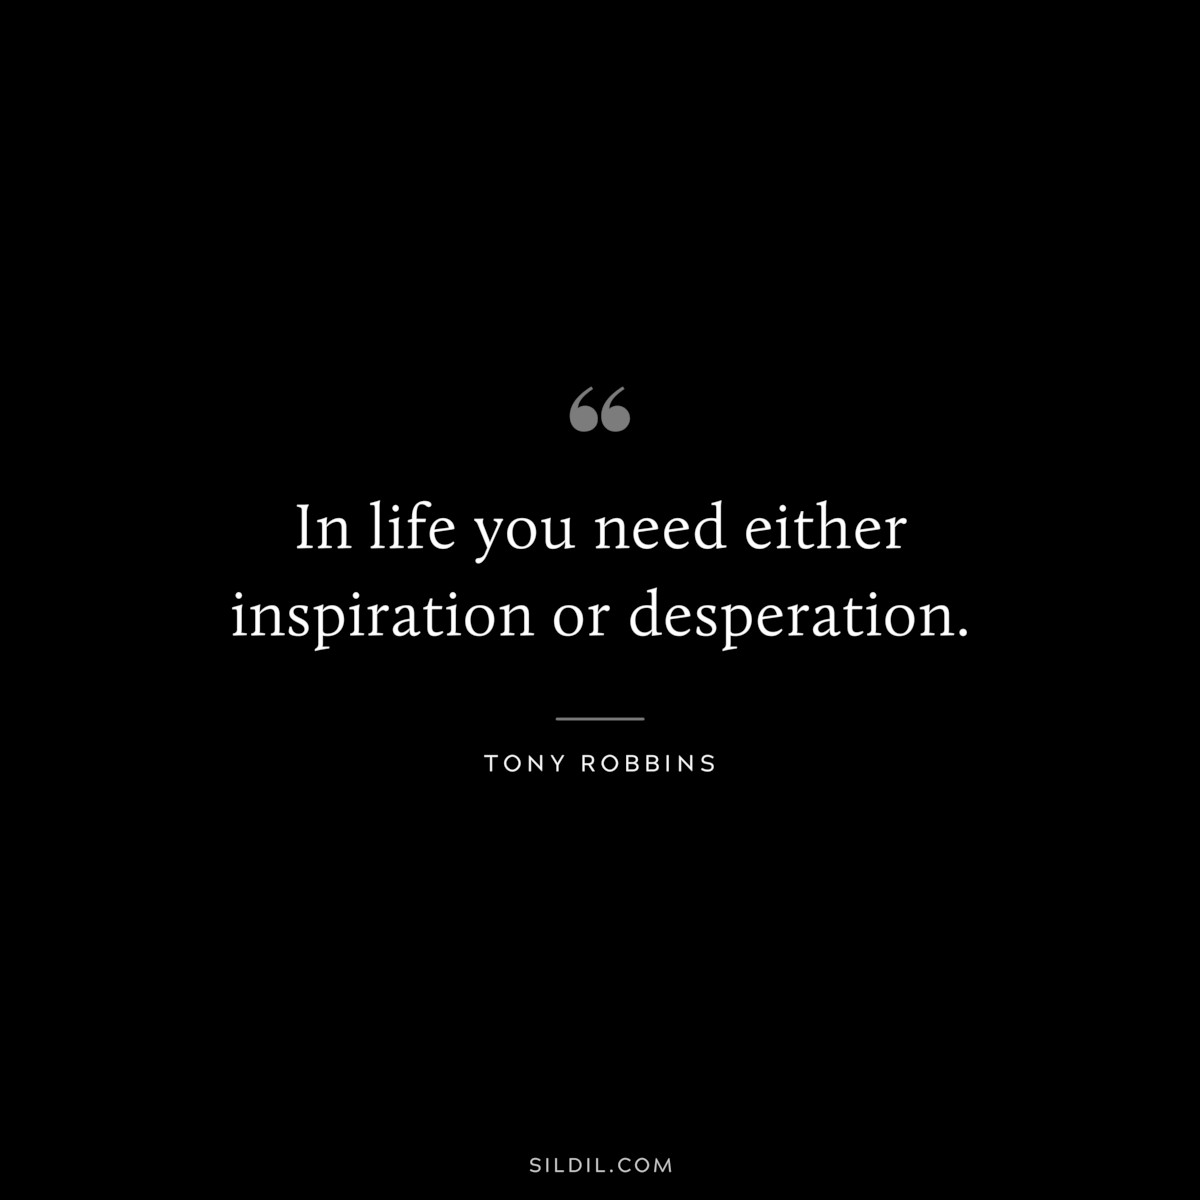 In life you need either inspiration or desperation. ― Tony Robbins